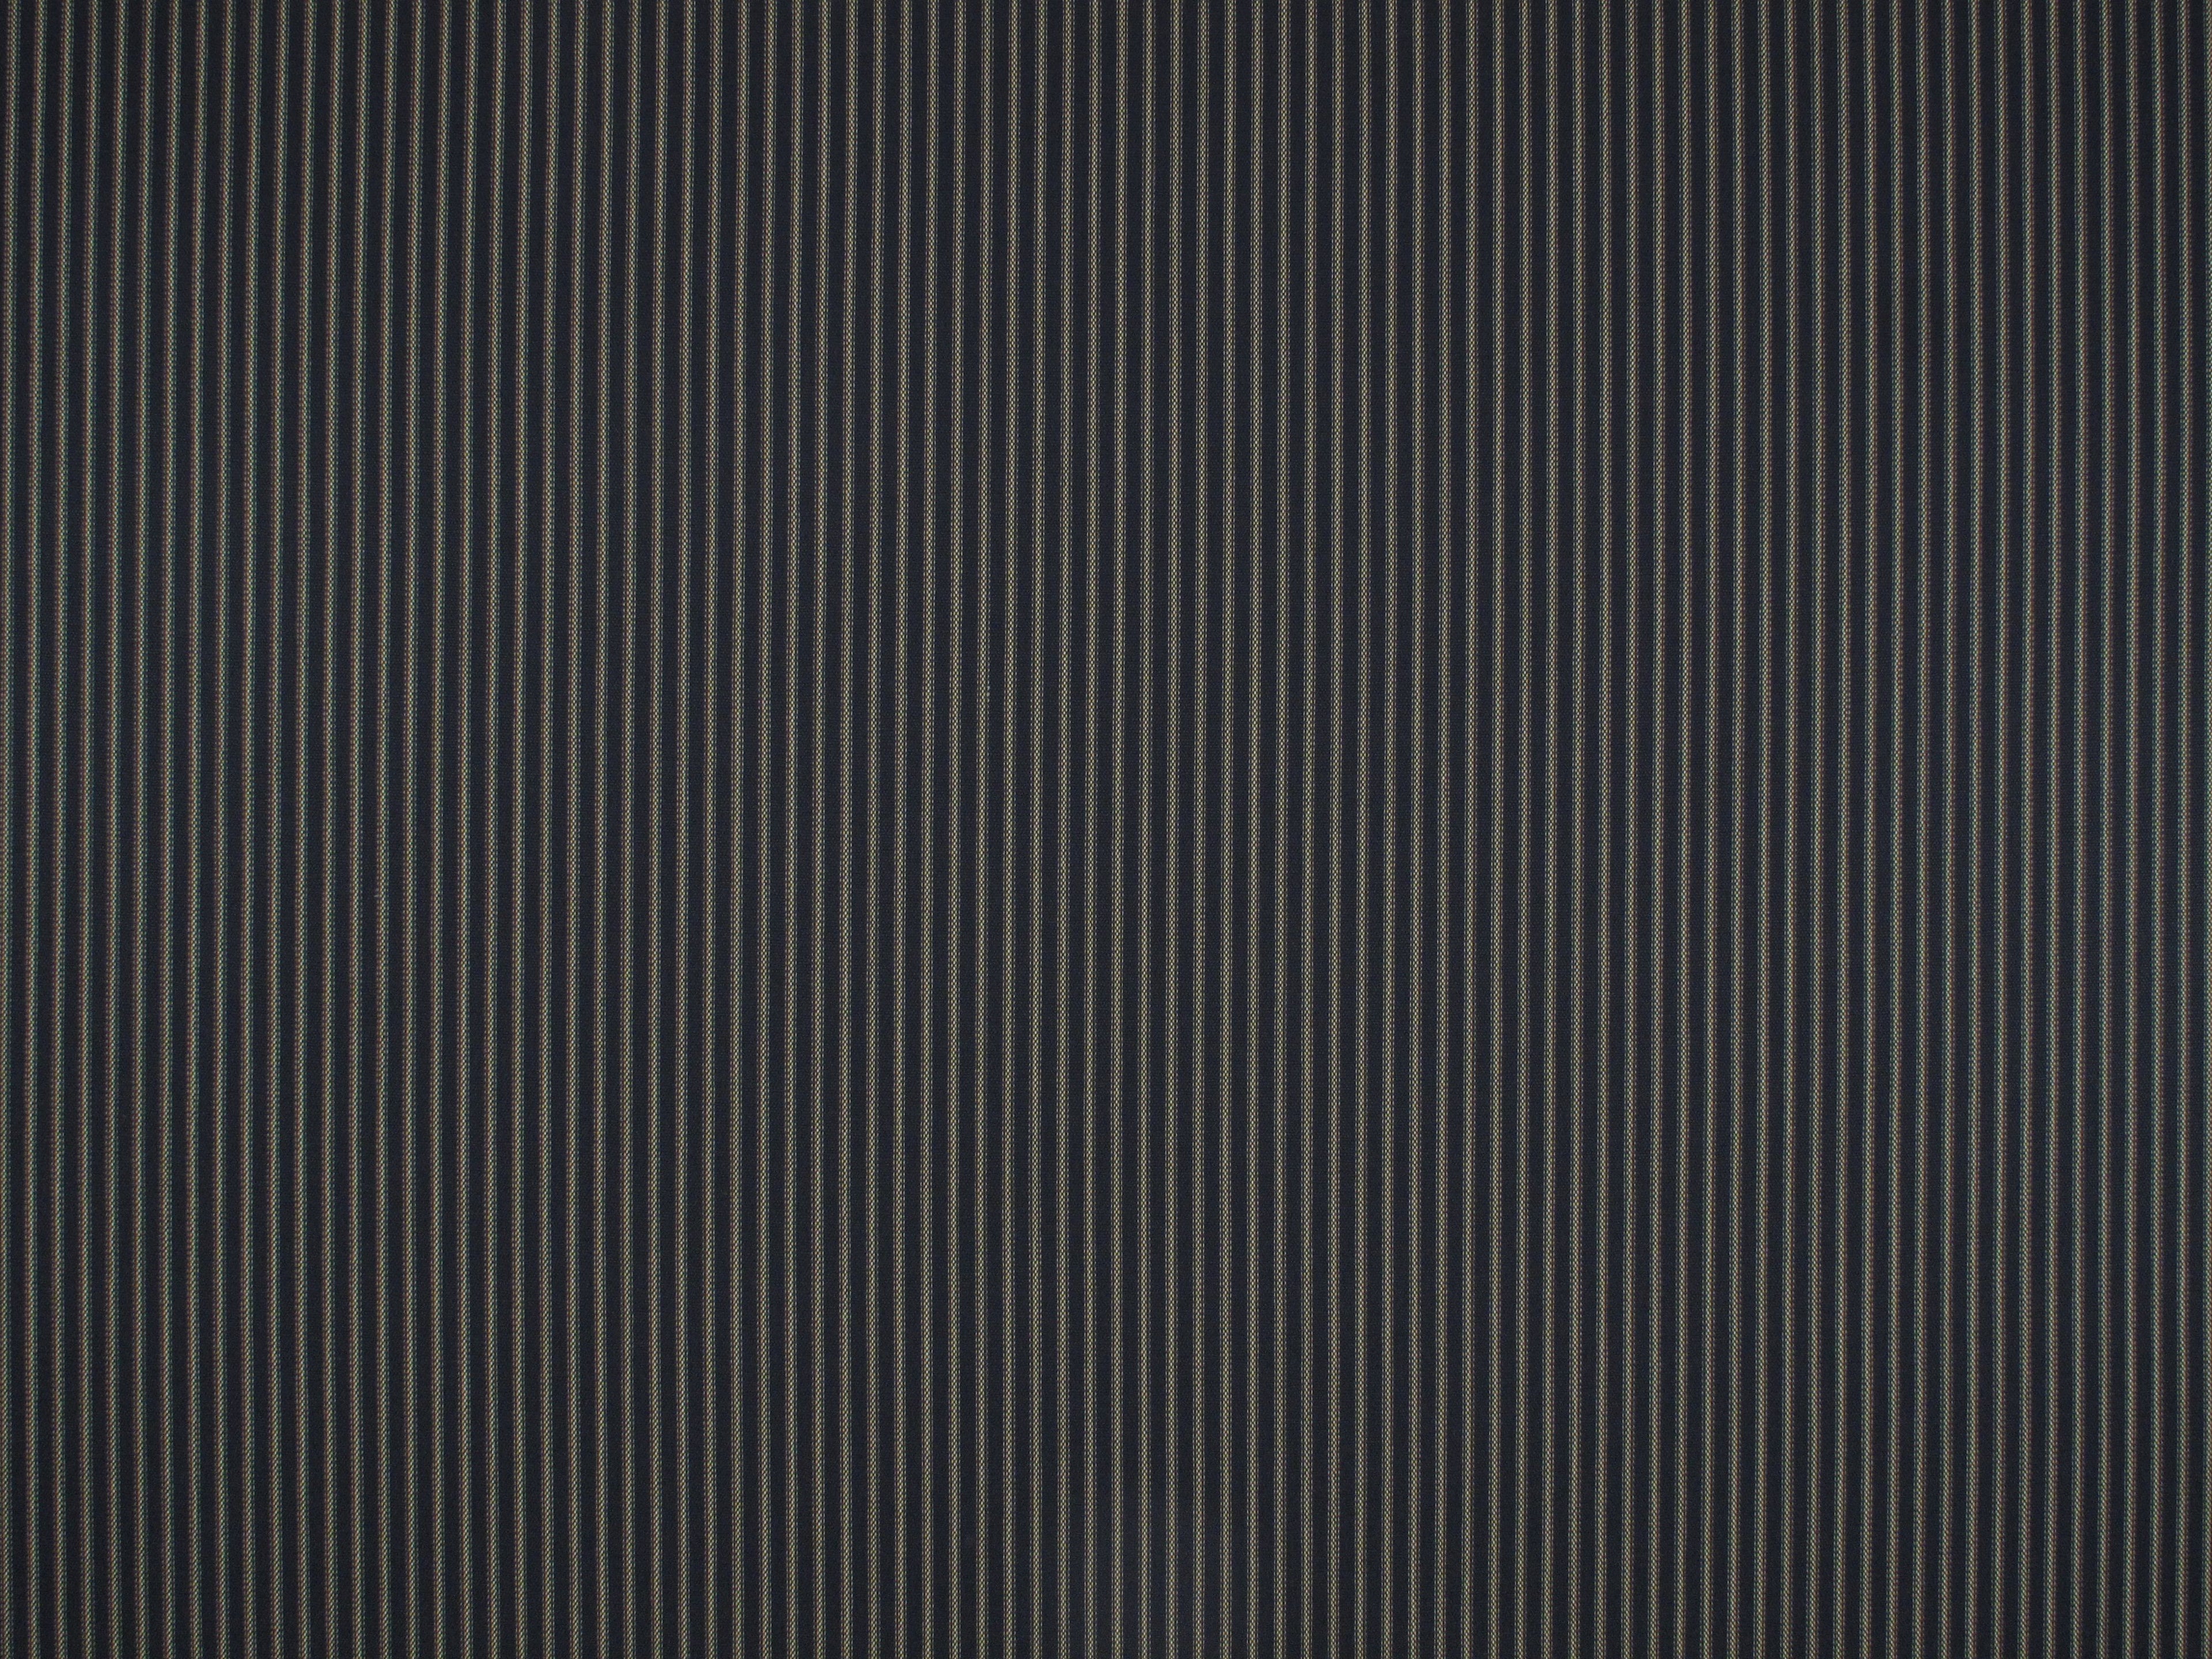 Buffalo Stripe fabric in navy camel color - pattern number SH 00041433 - by Scalamandre in the Old World Weavers collection